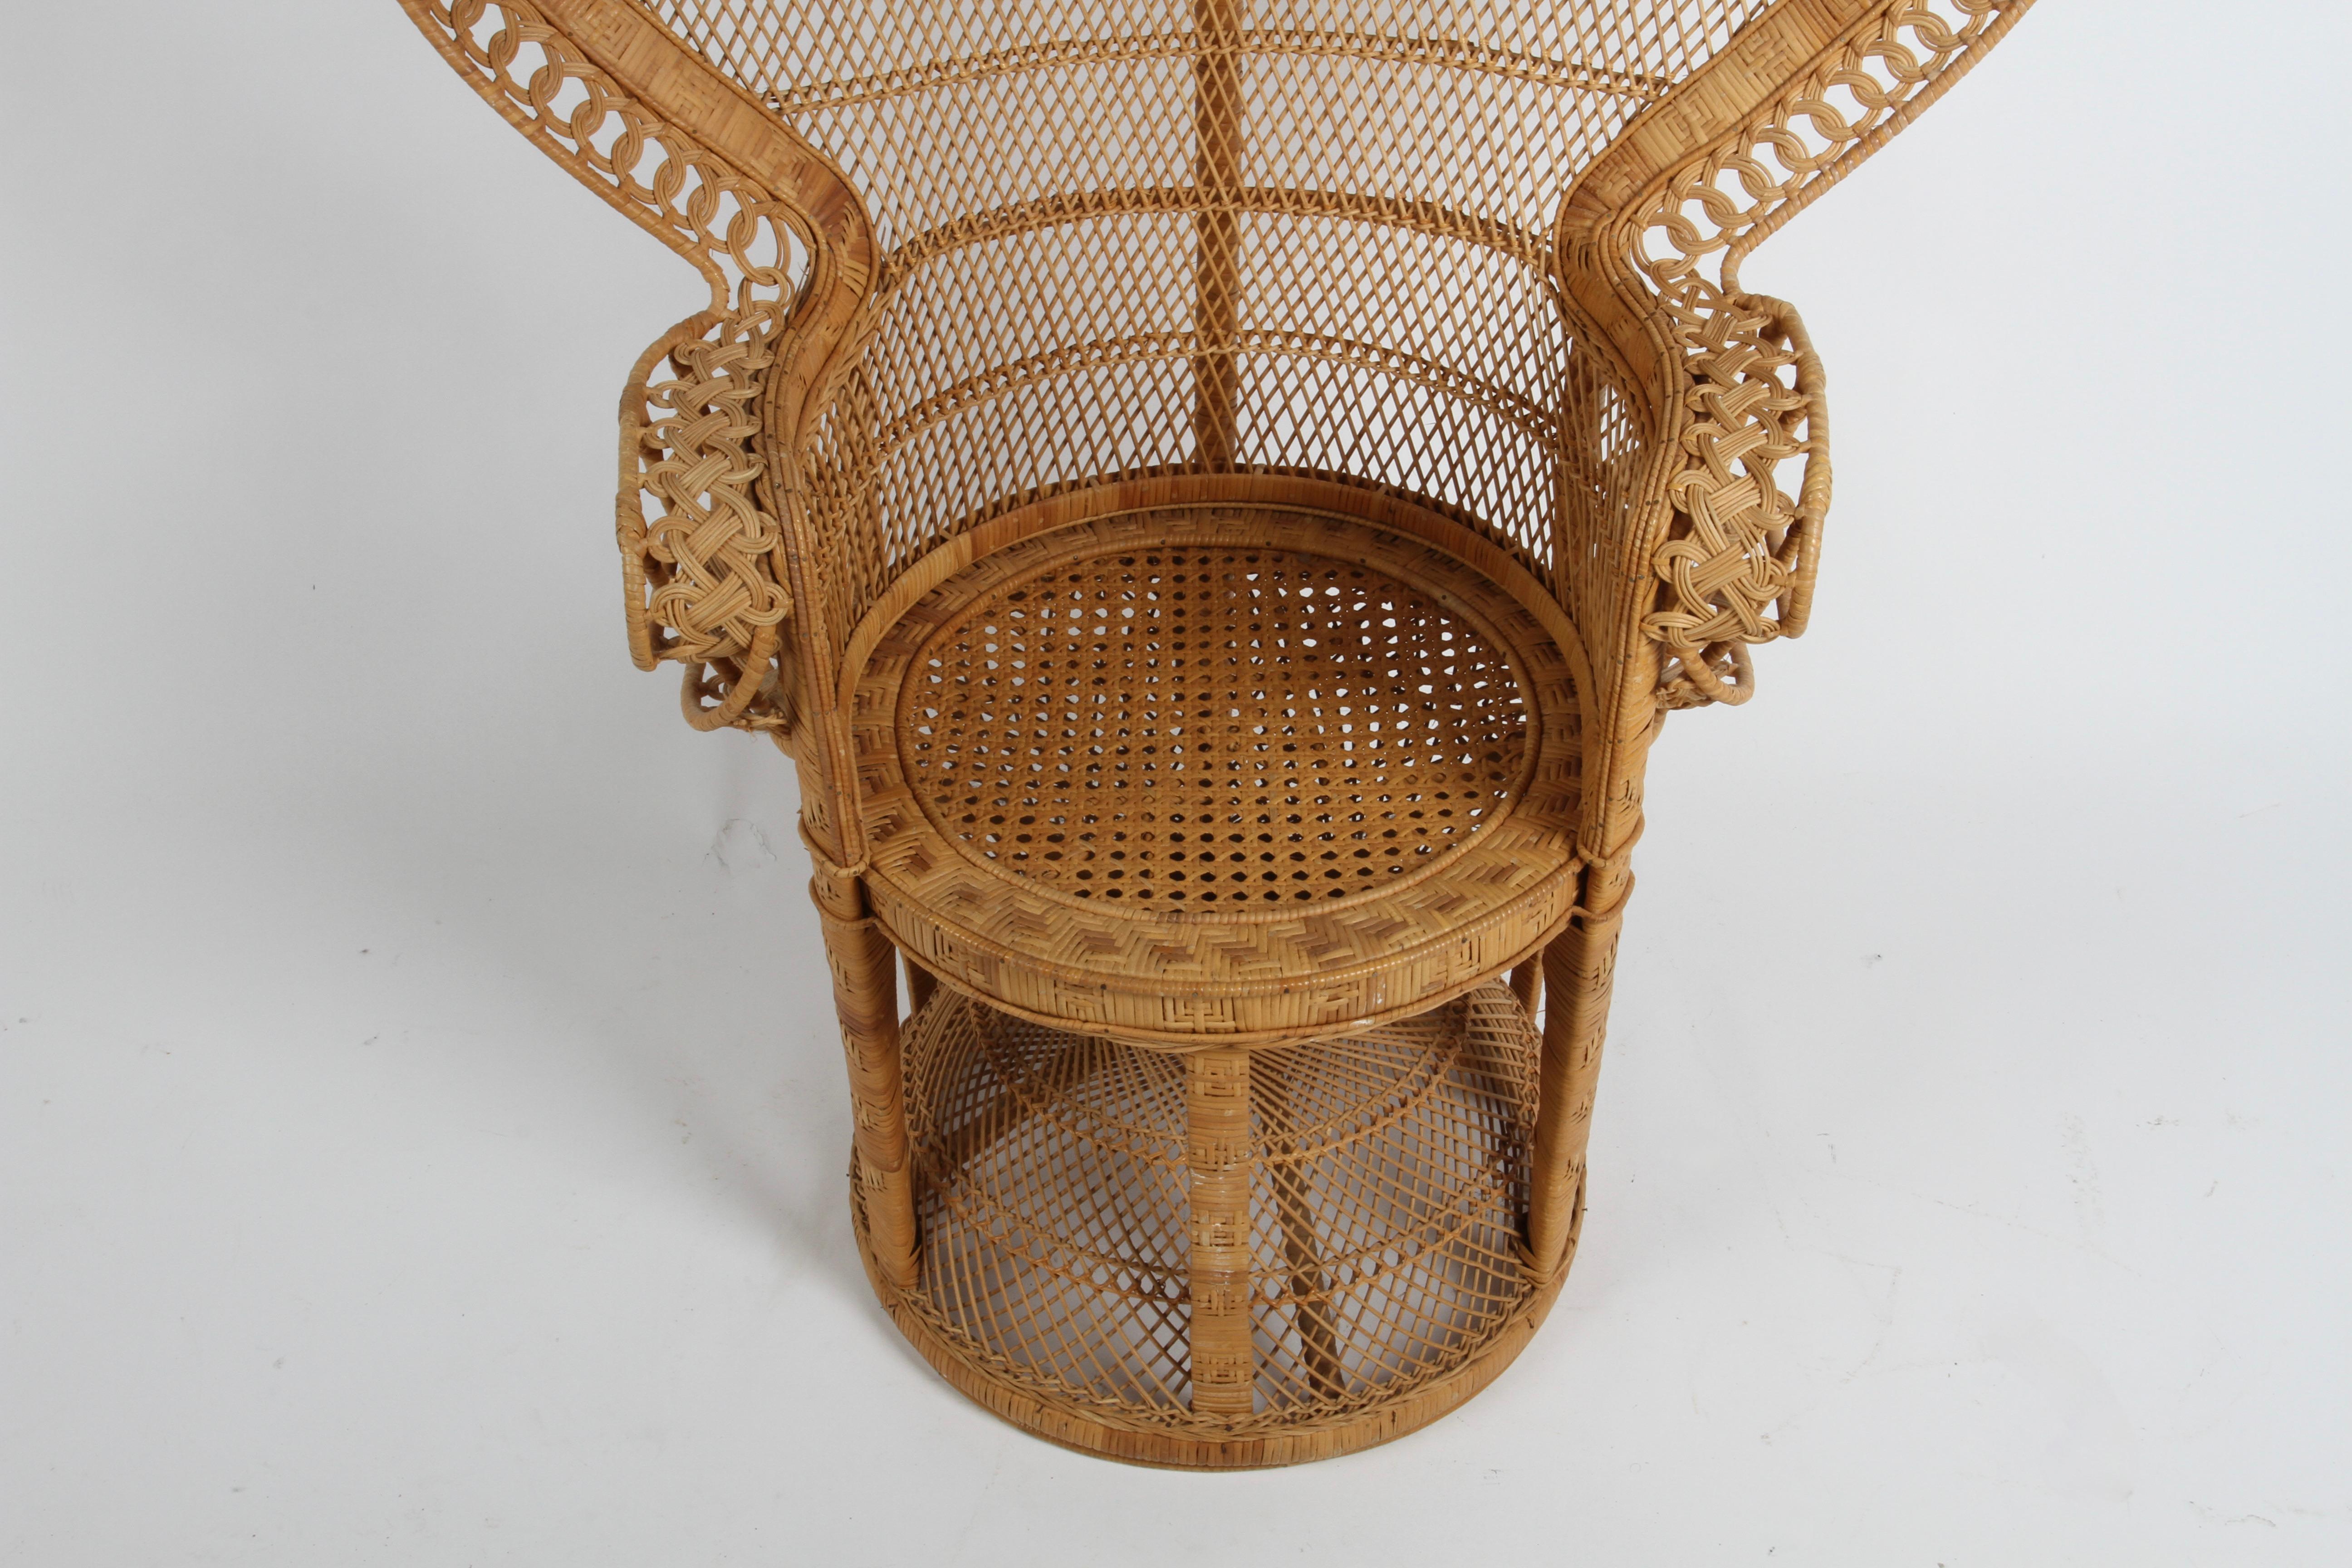 Philippine Vintage 1970s Rattan & Wicker Handcrafted Boho Chic Emmanuelle Peacock Chair For Sale